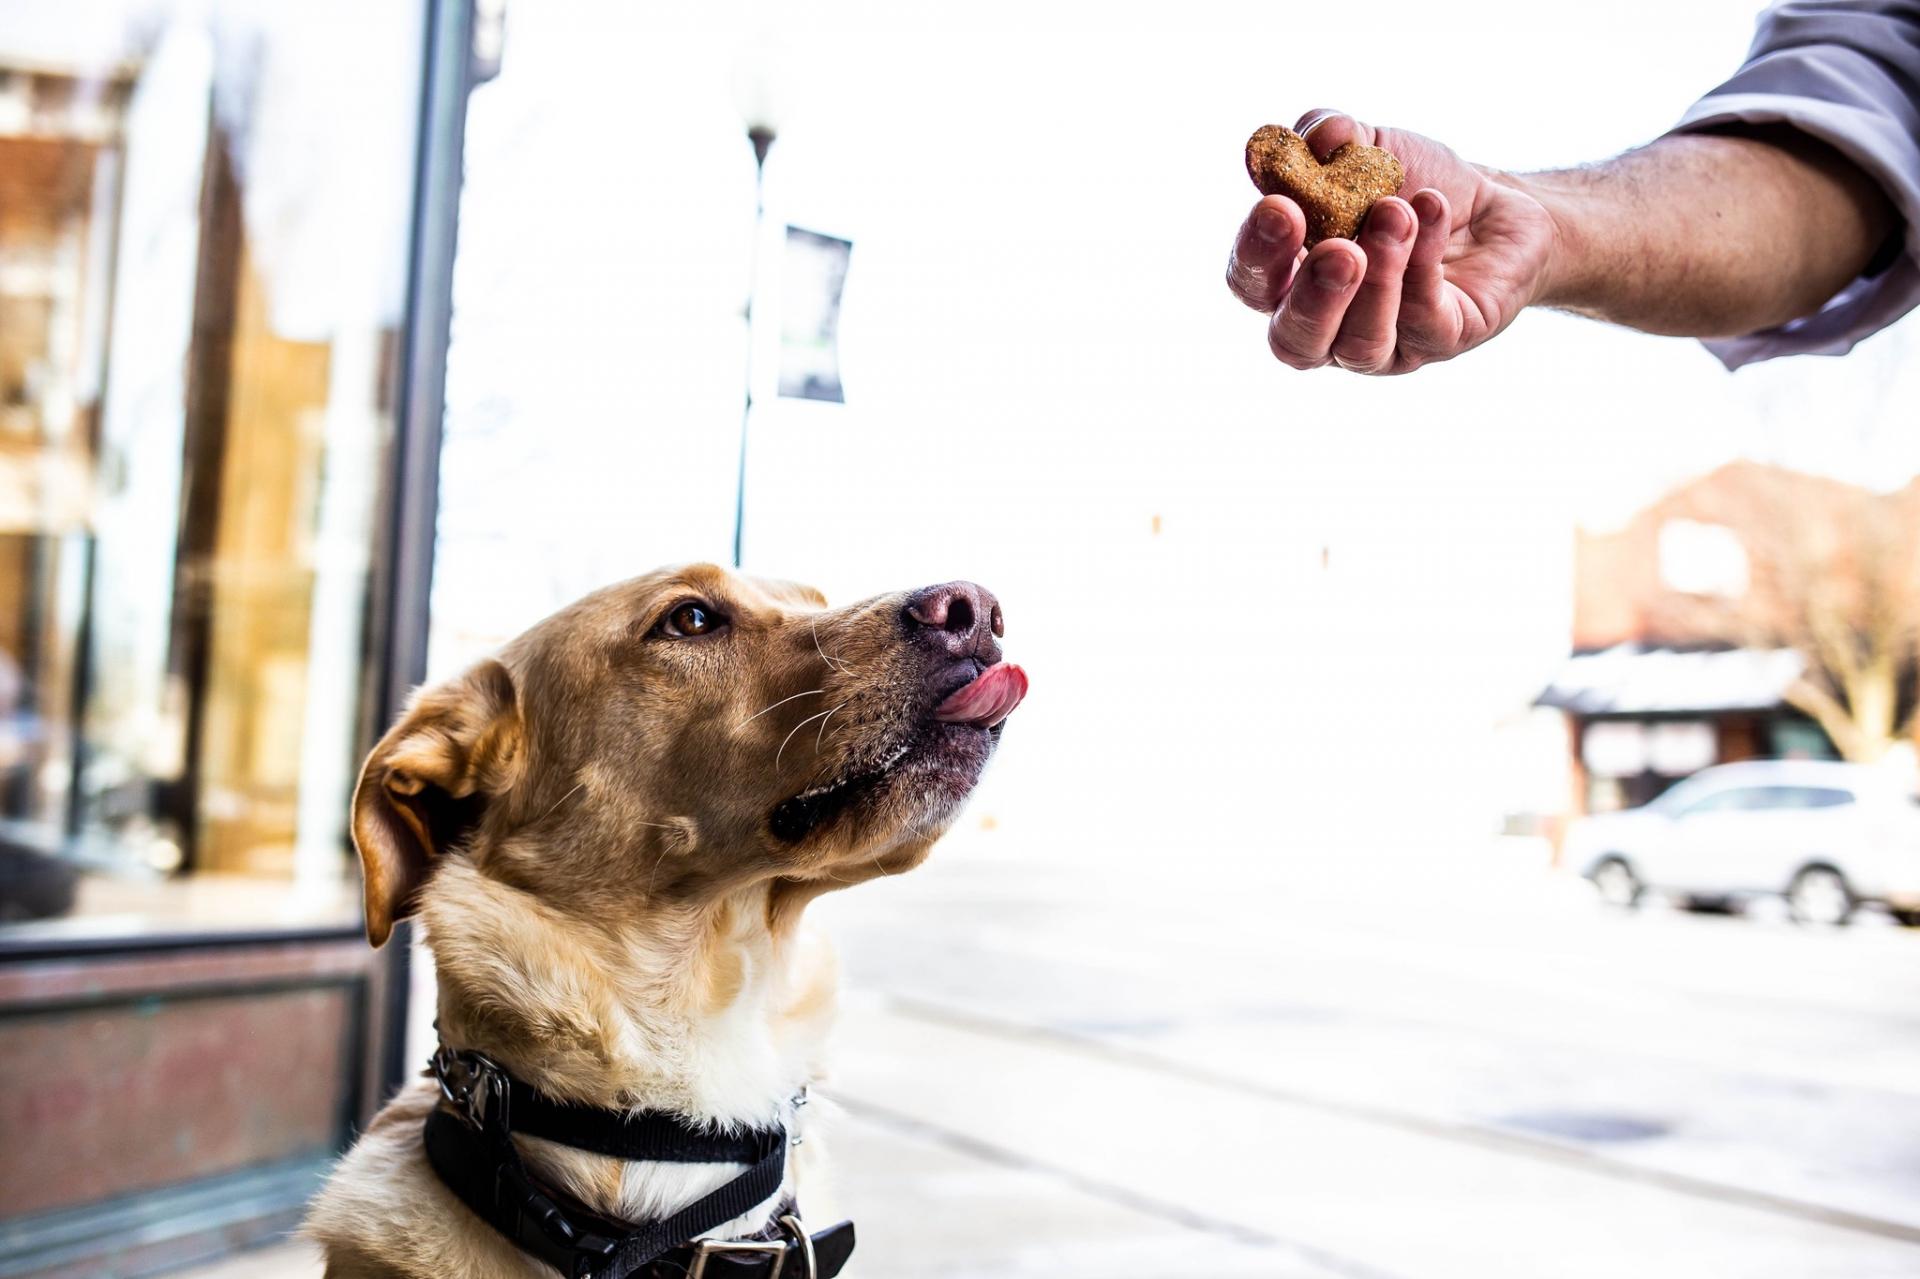 A person giving a treat to a dog.